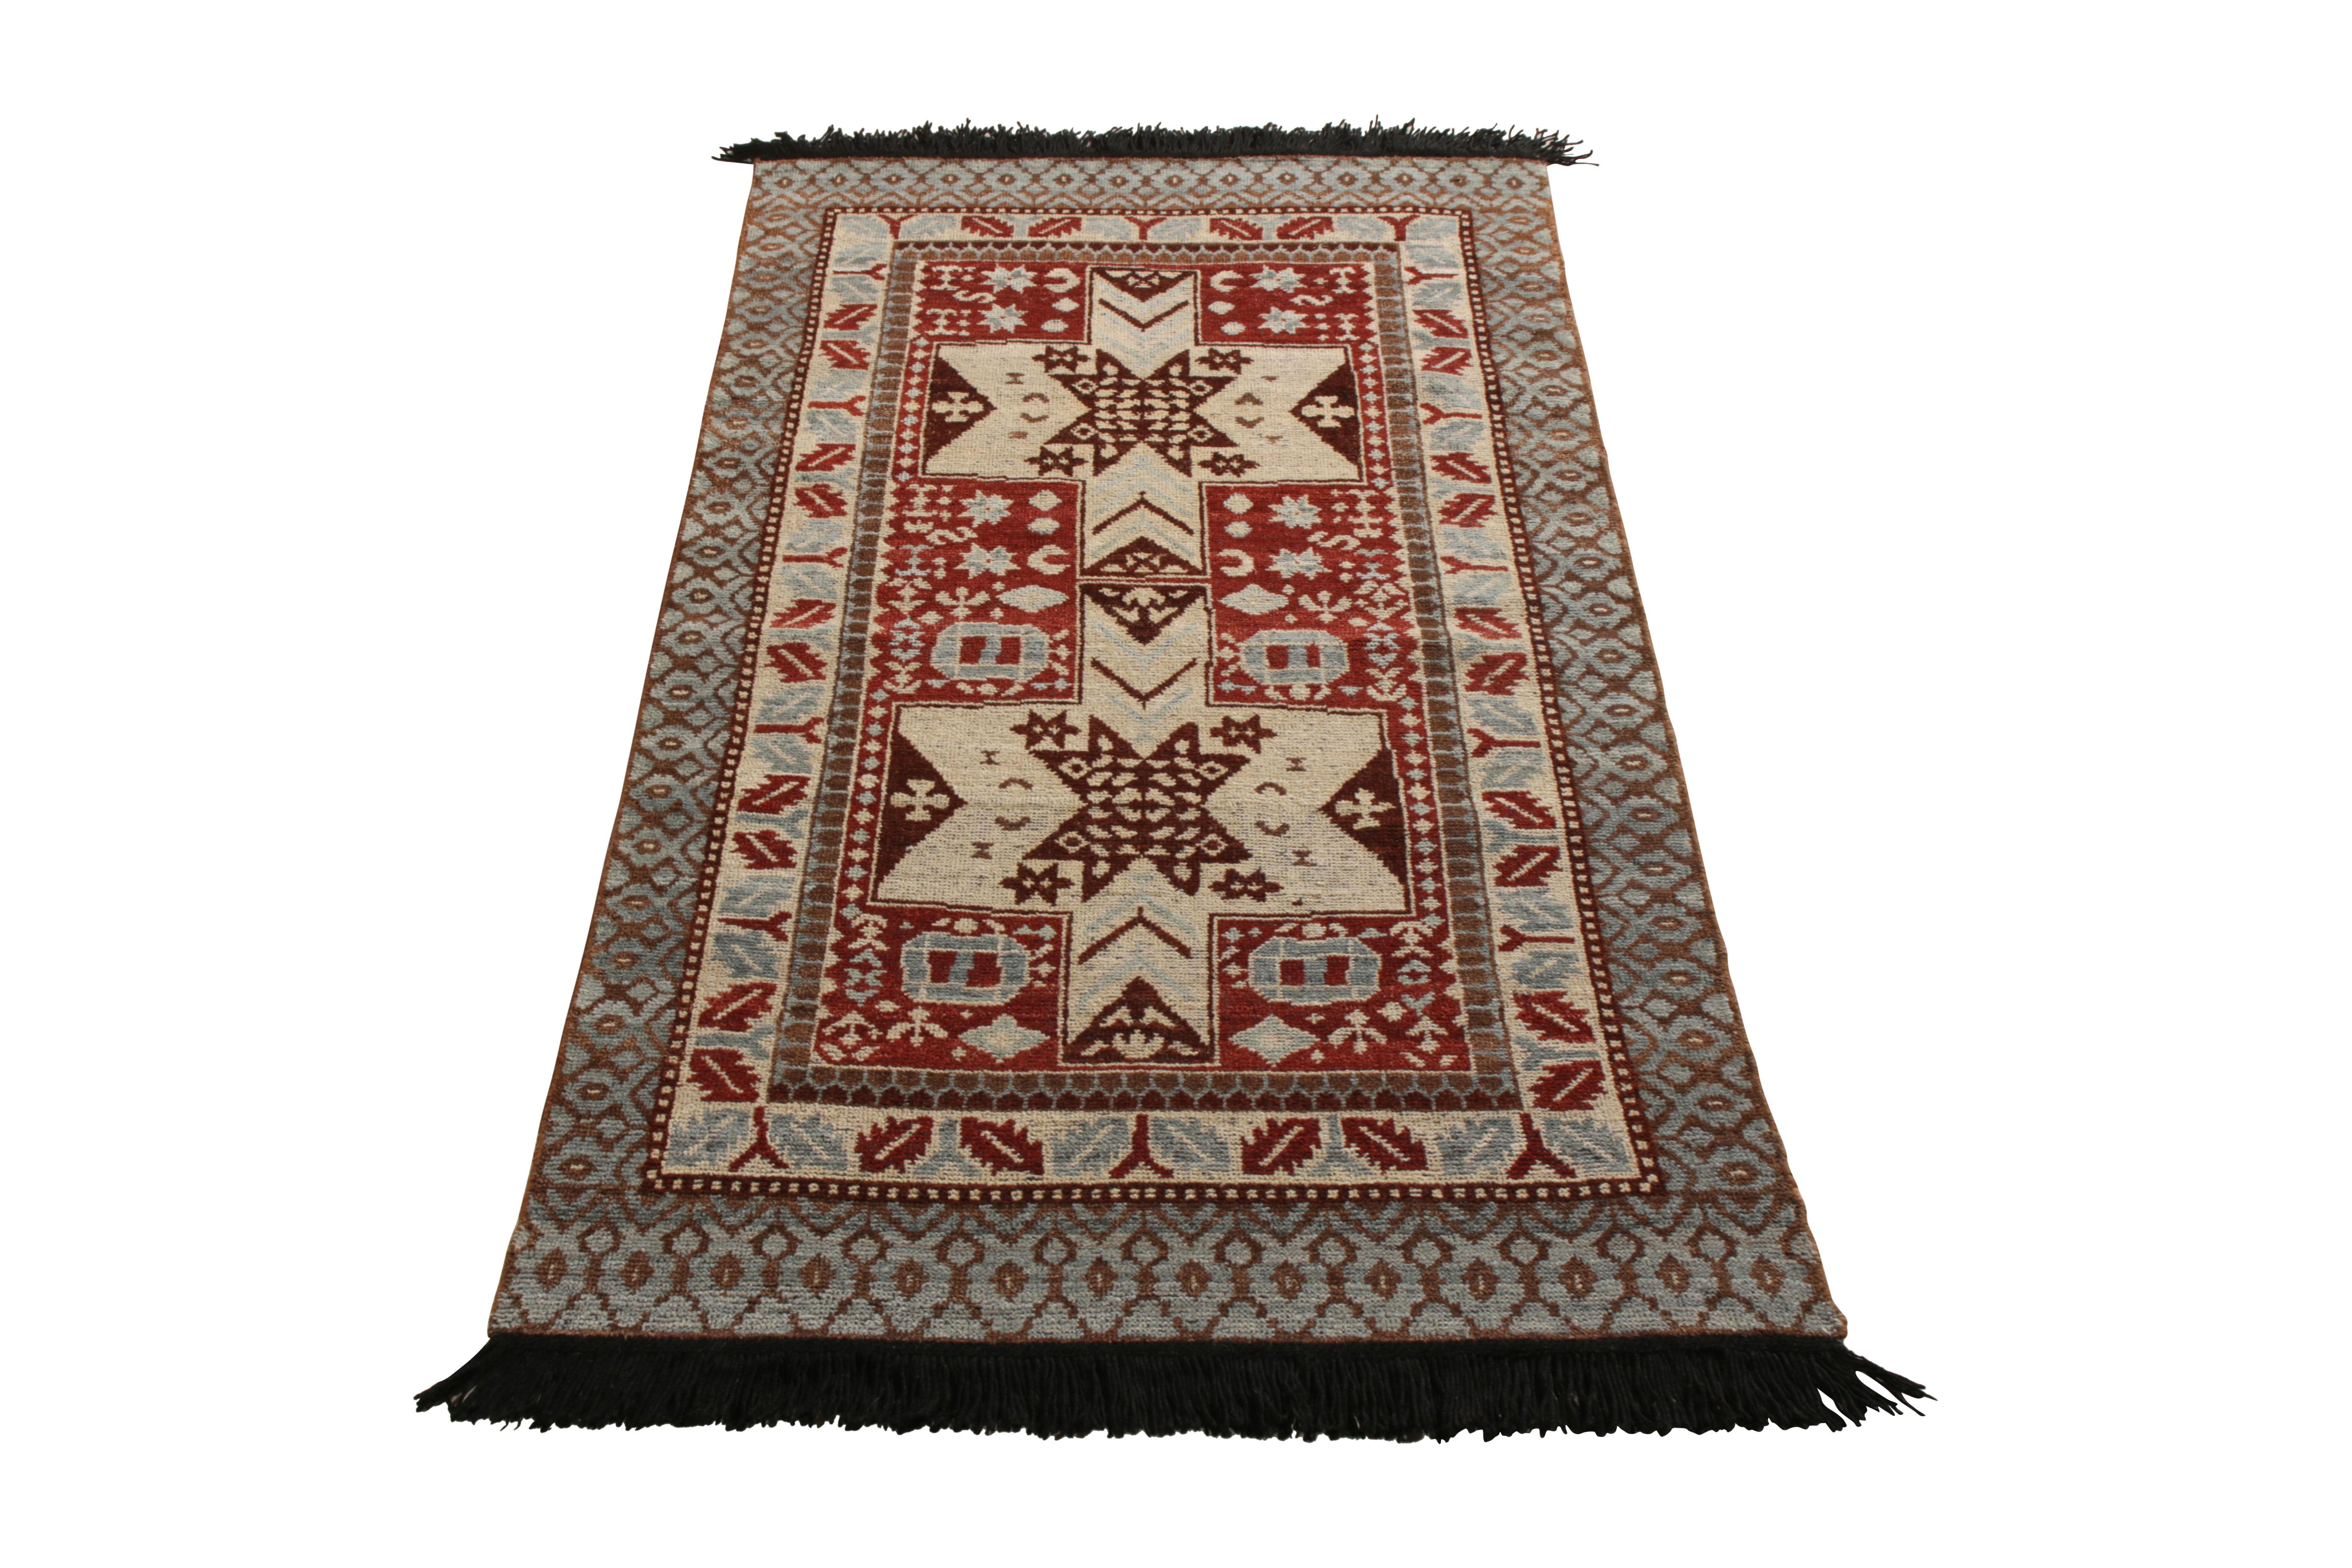 A 3 x 6 runner from Rug & Kilim’s Burano Collection, hand knotted in notably soft Ghazni wool. Enjoying rich burgundy in a warm-and-cool blue and beige-brown complementing this take on tribal geometric patterns.

On the design: The balance of warm